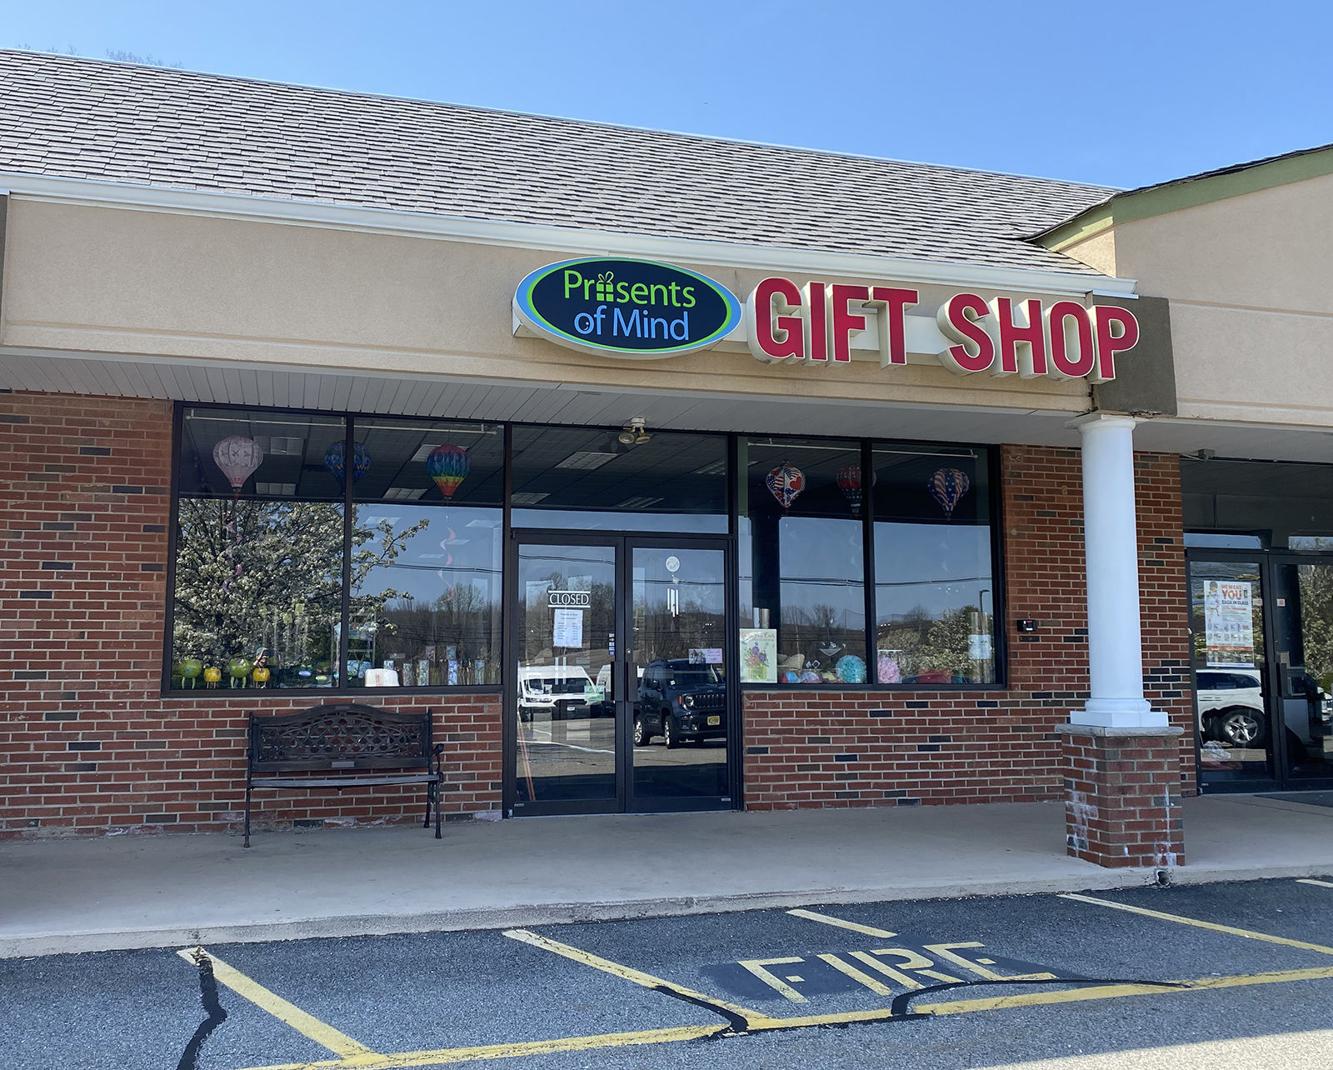 Presents of Mind, 240 Route 206, Flanders, has fully reopened post-Covid with a makeover and new gift items added to its inventory.